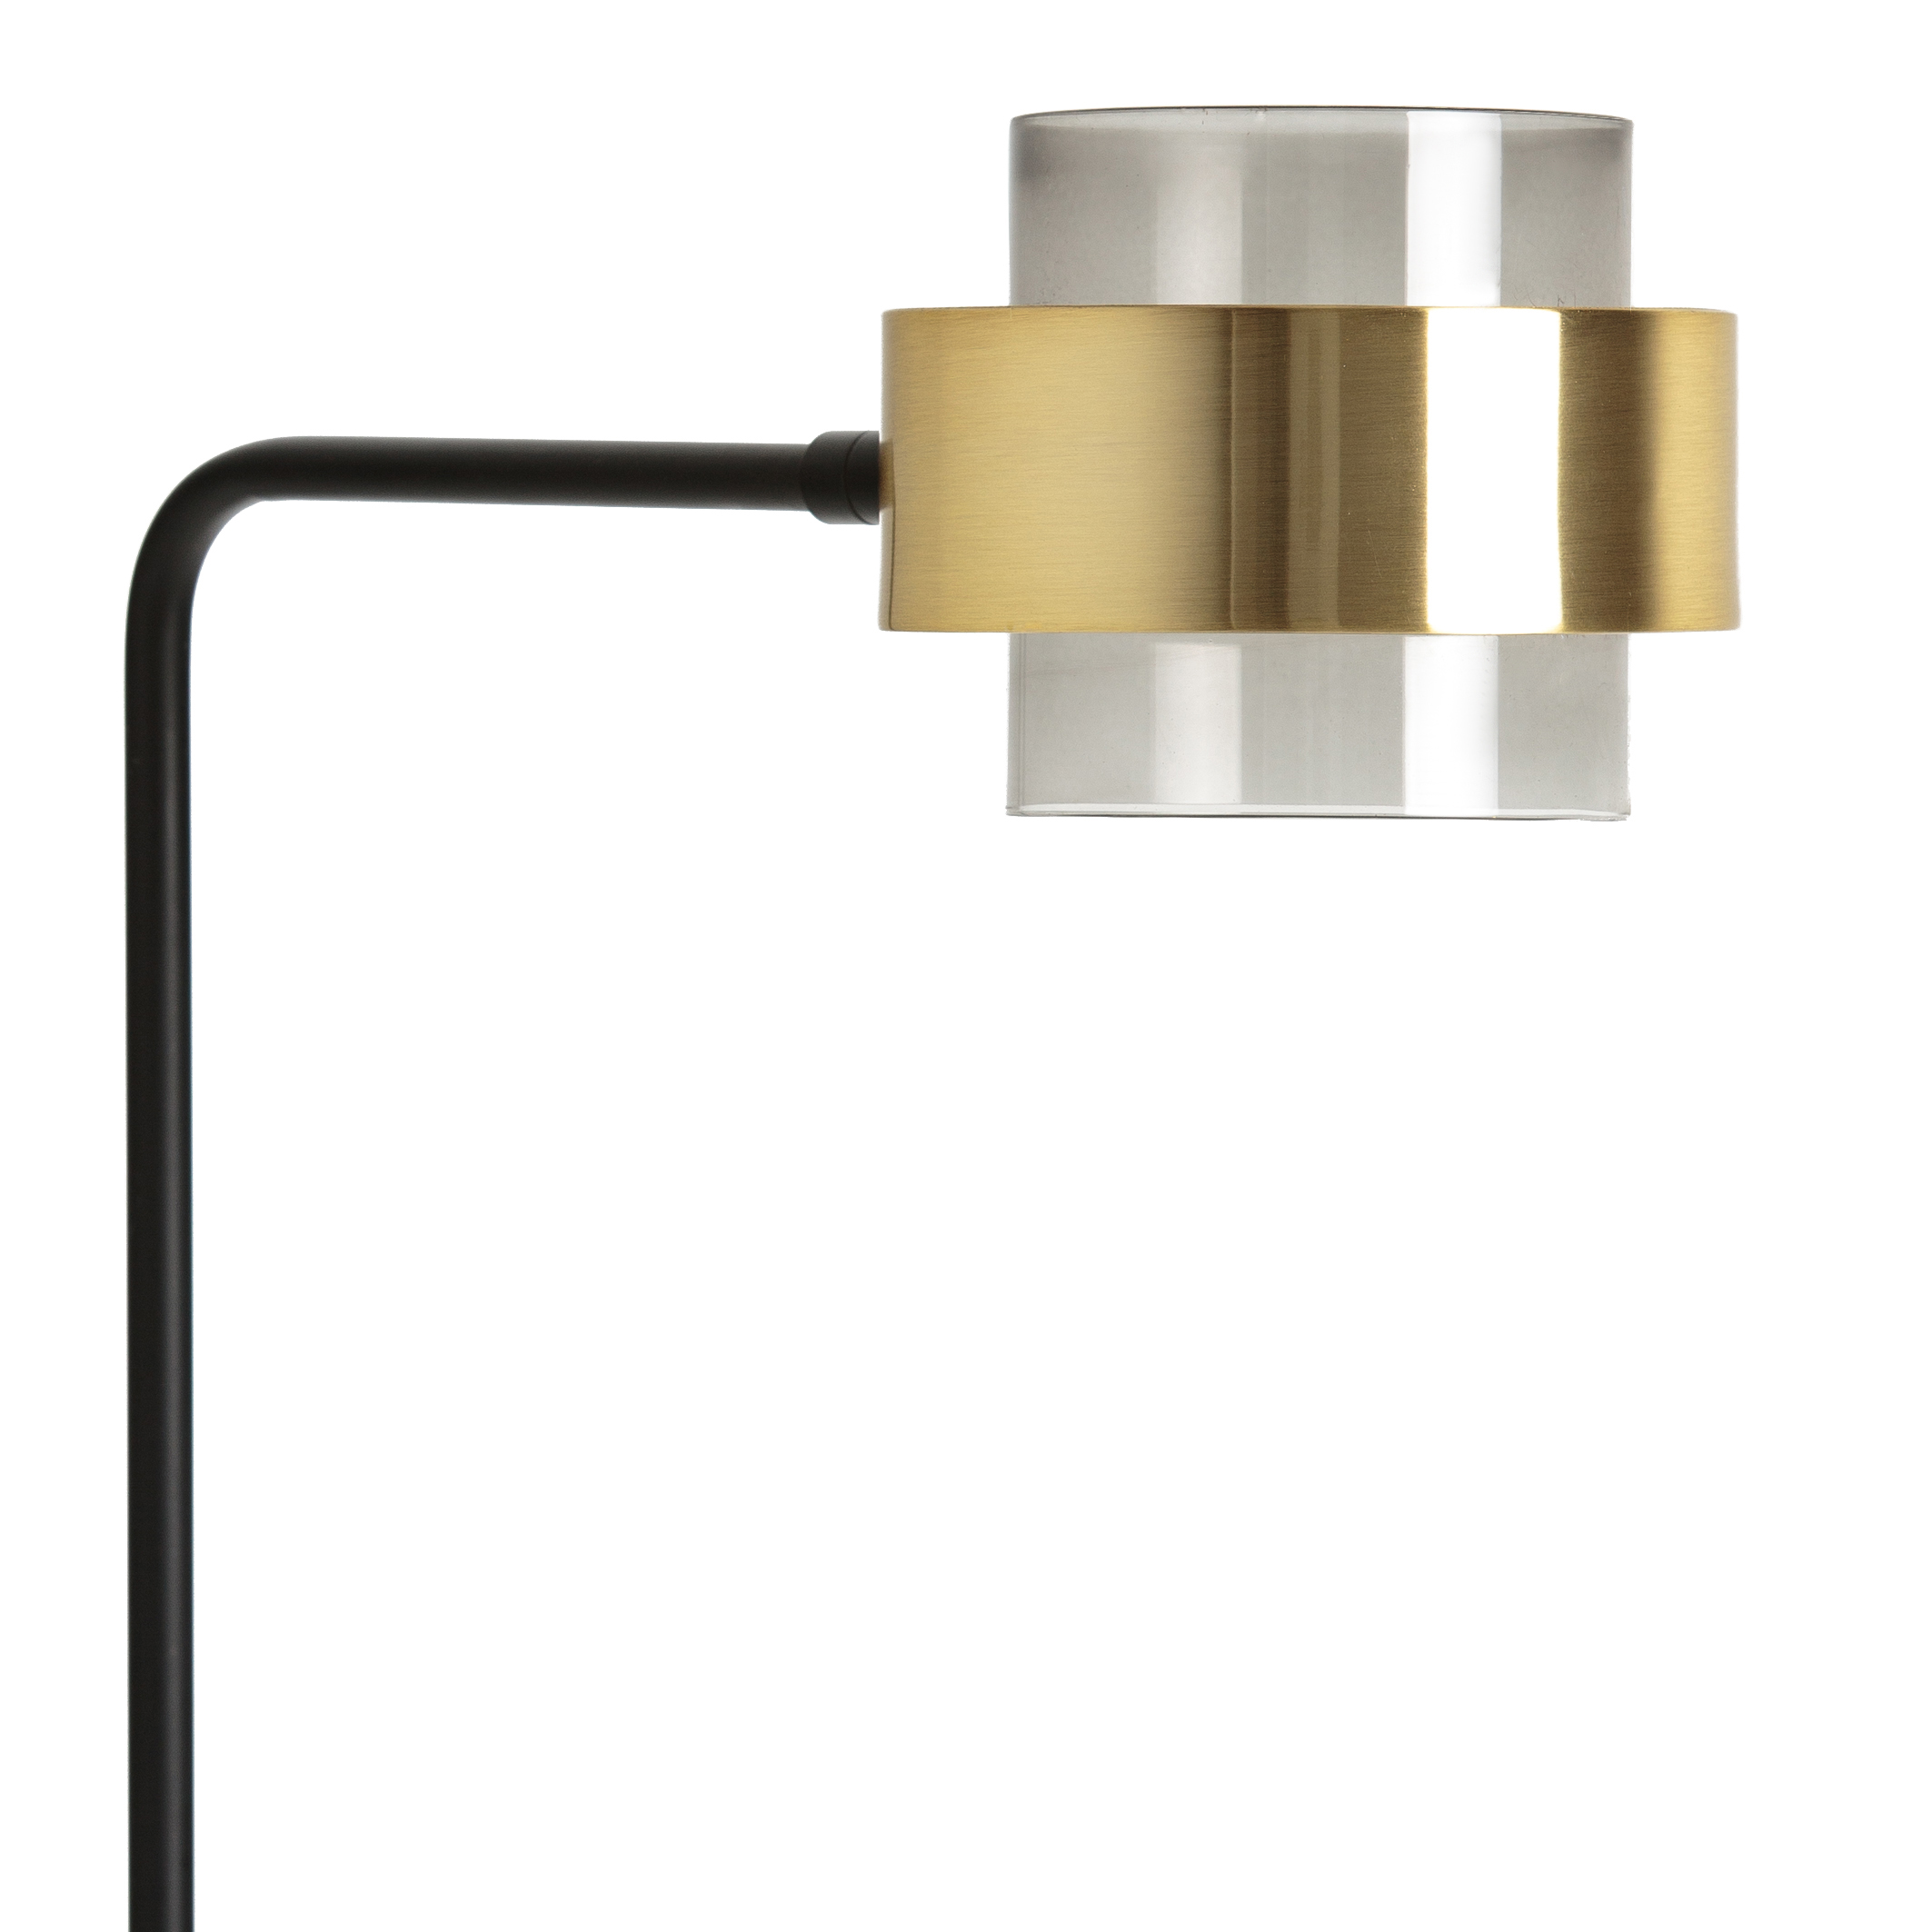 Botello metal & glass reading Redoute La | lamp with arms adjustable Redoute floor La black/brass Interieurs